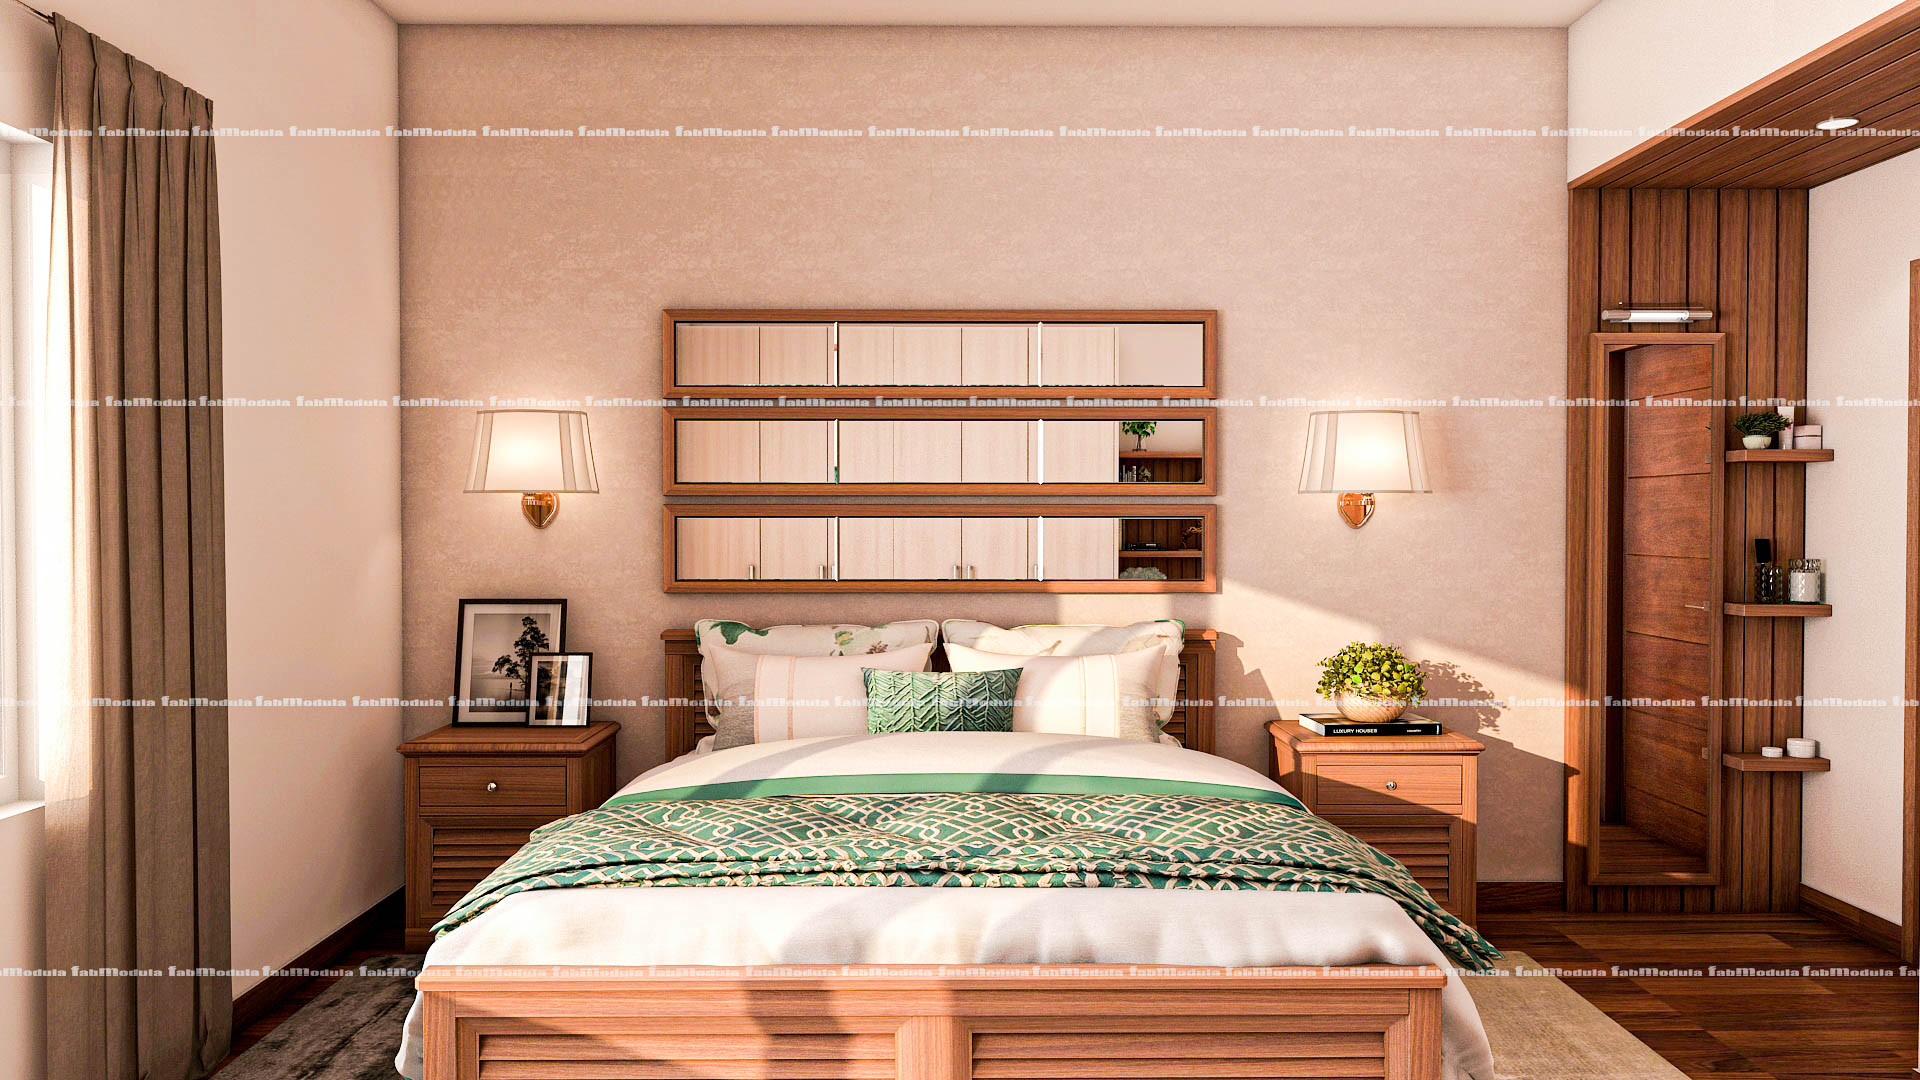 FabModula parents bedroom with queen size bed, side drawers and painting